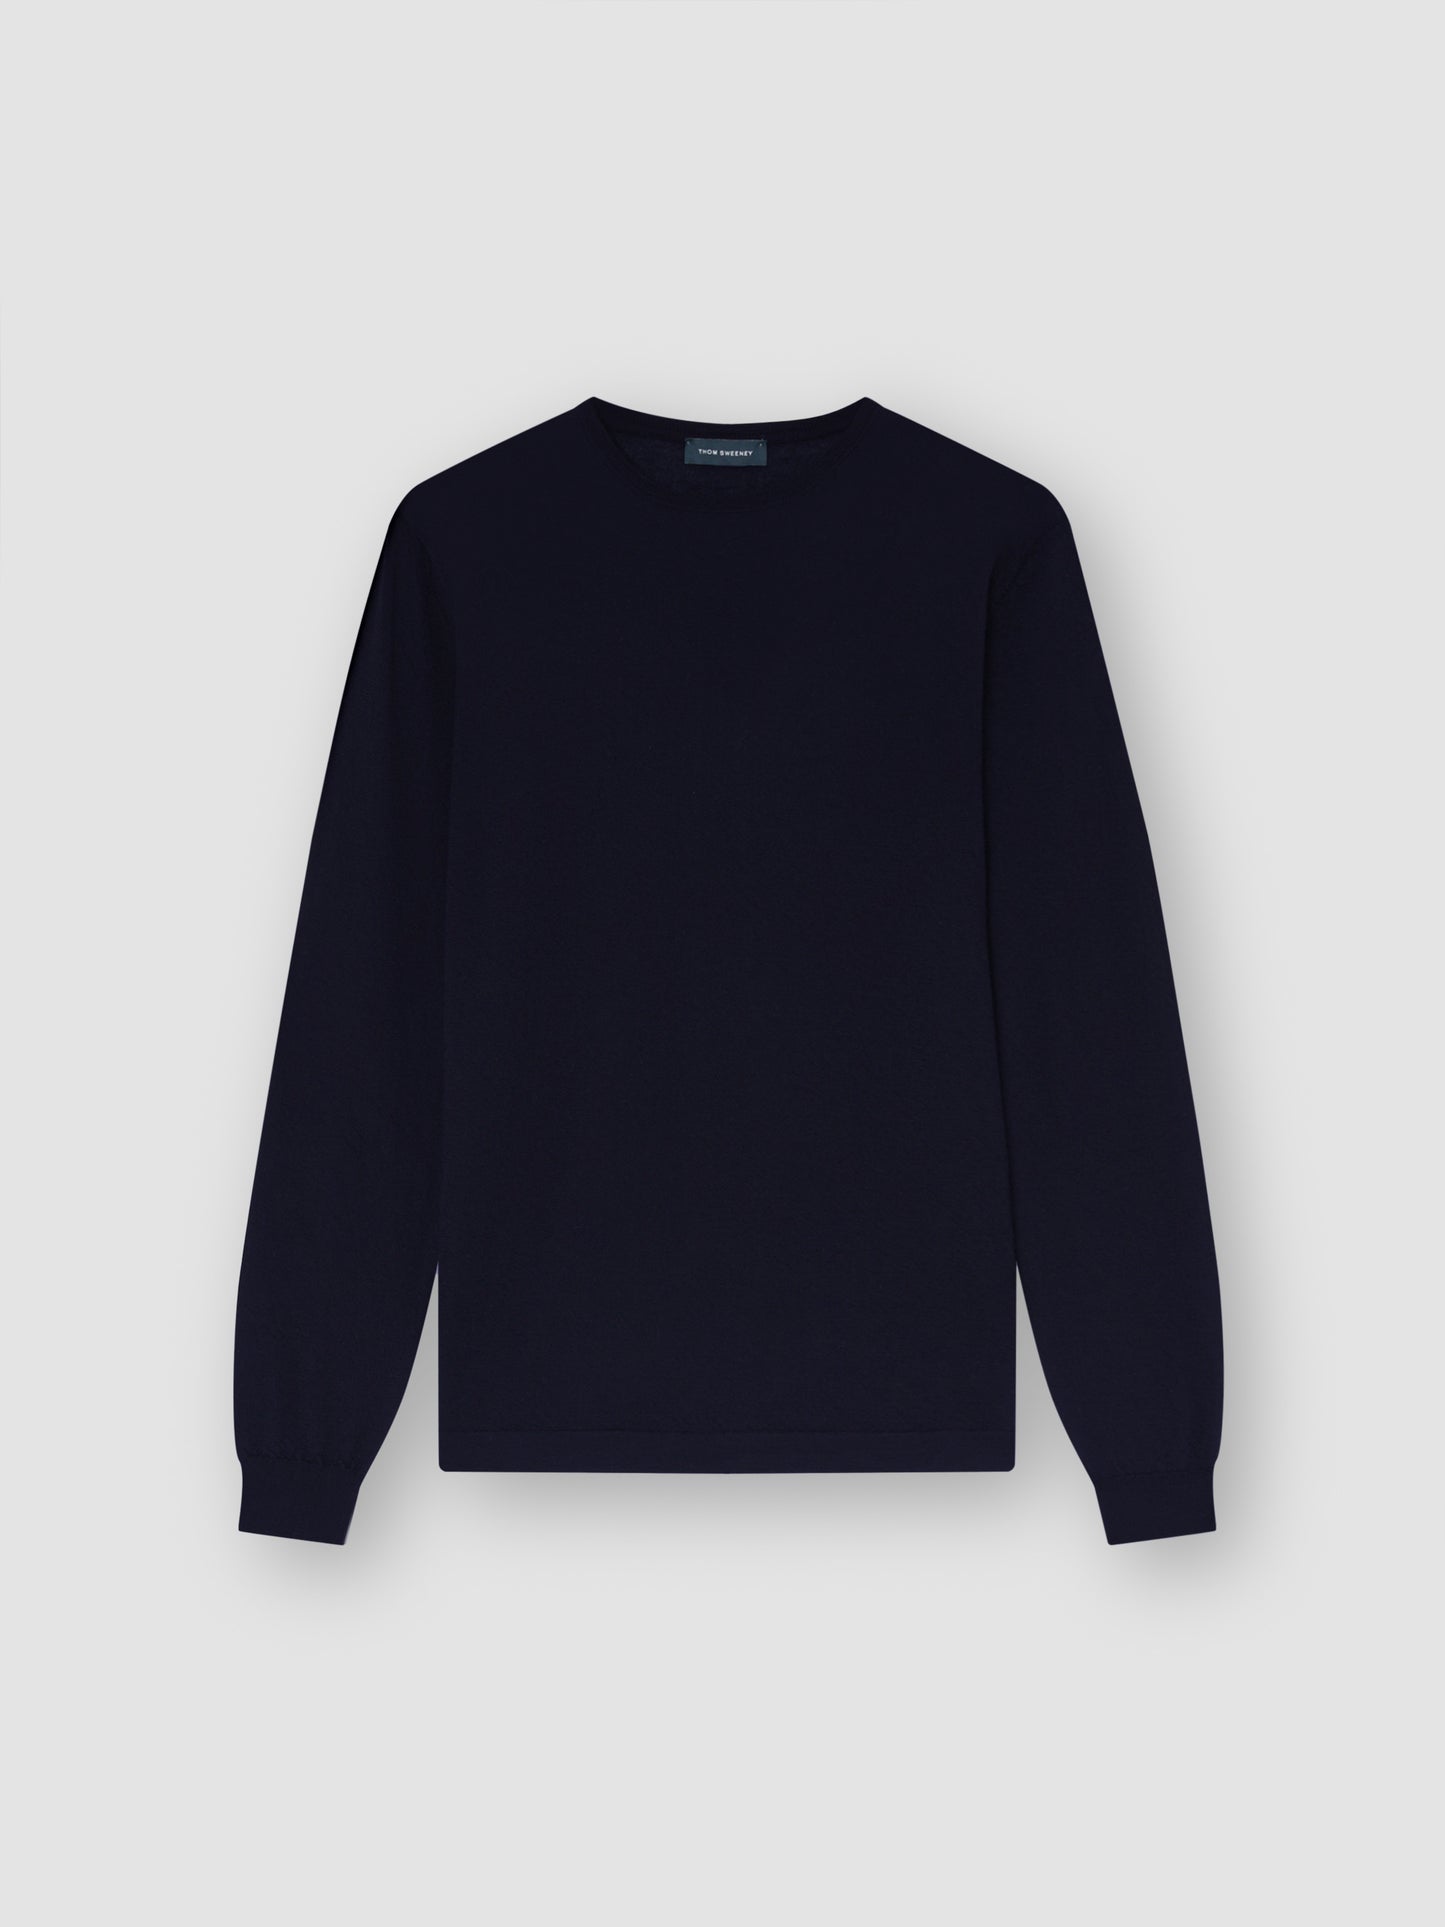 Cashmere Crew Collar Lightweight Sweater Navy Product Image